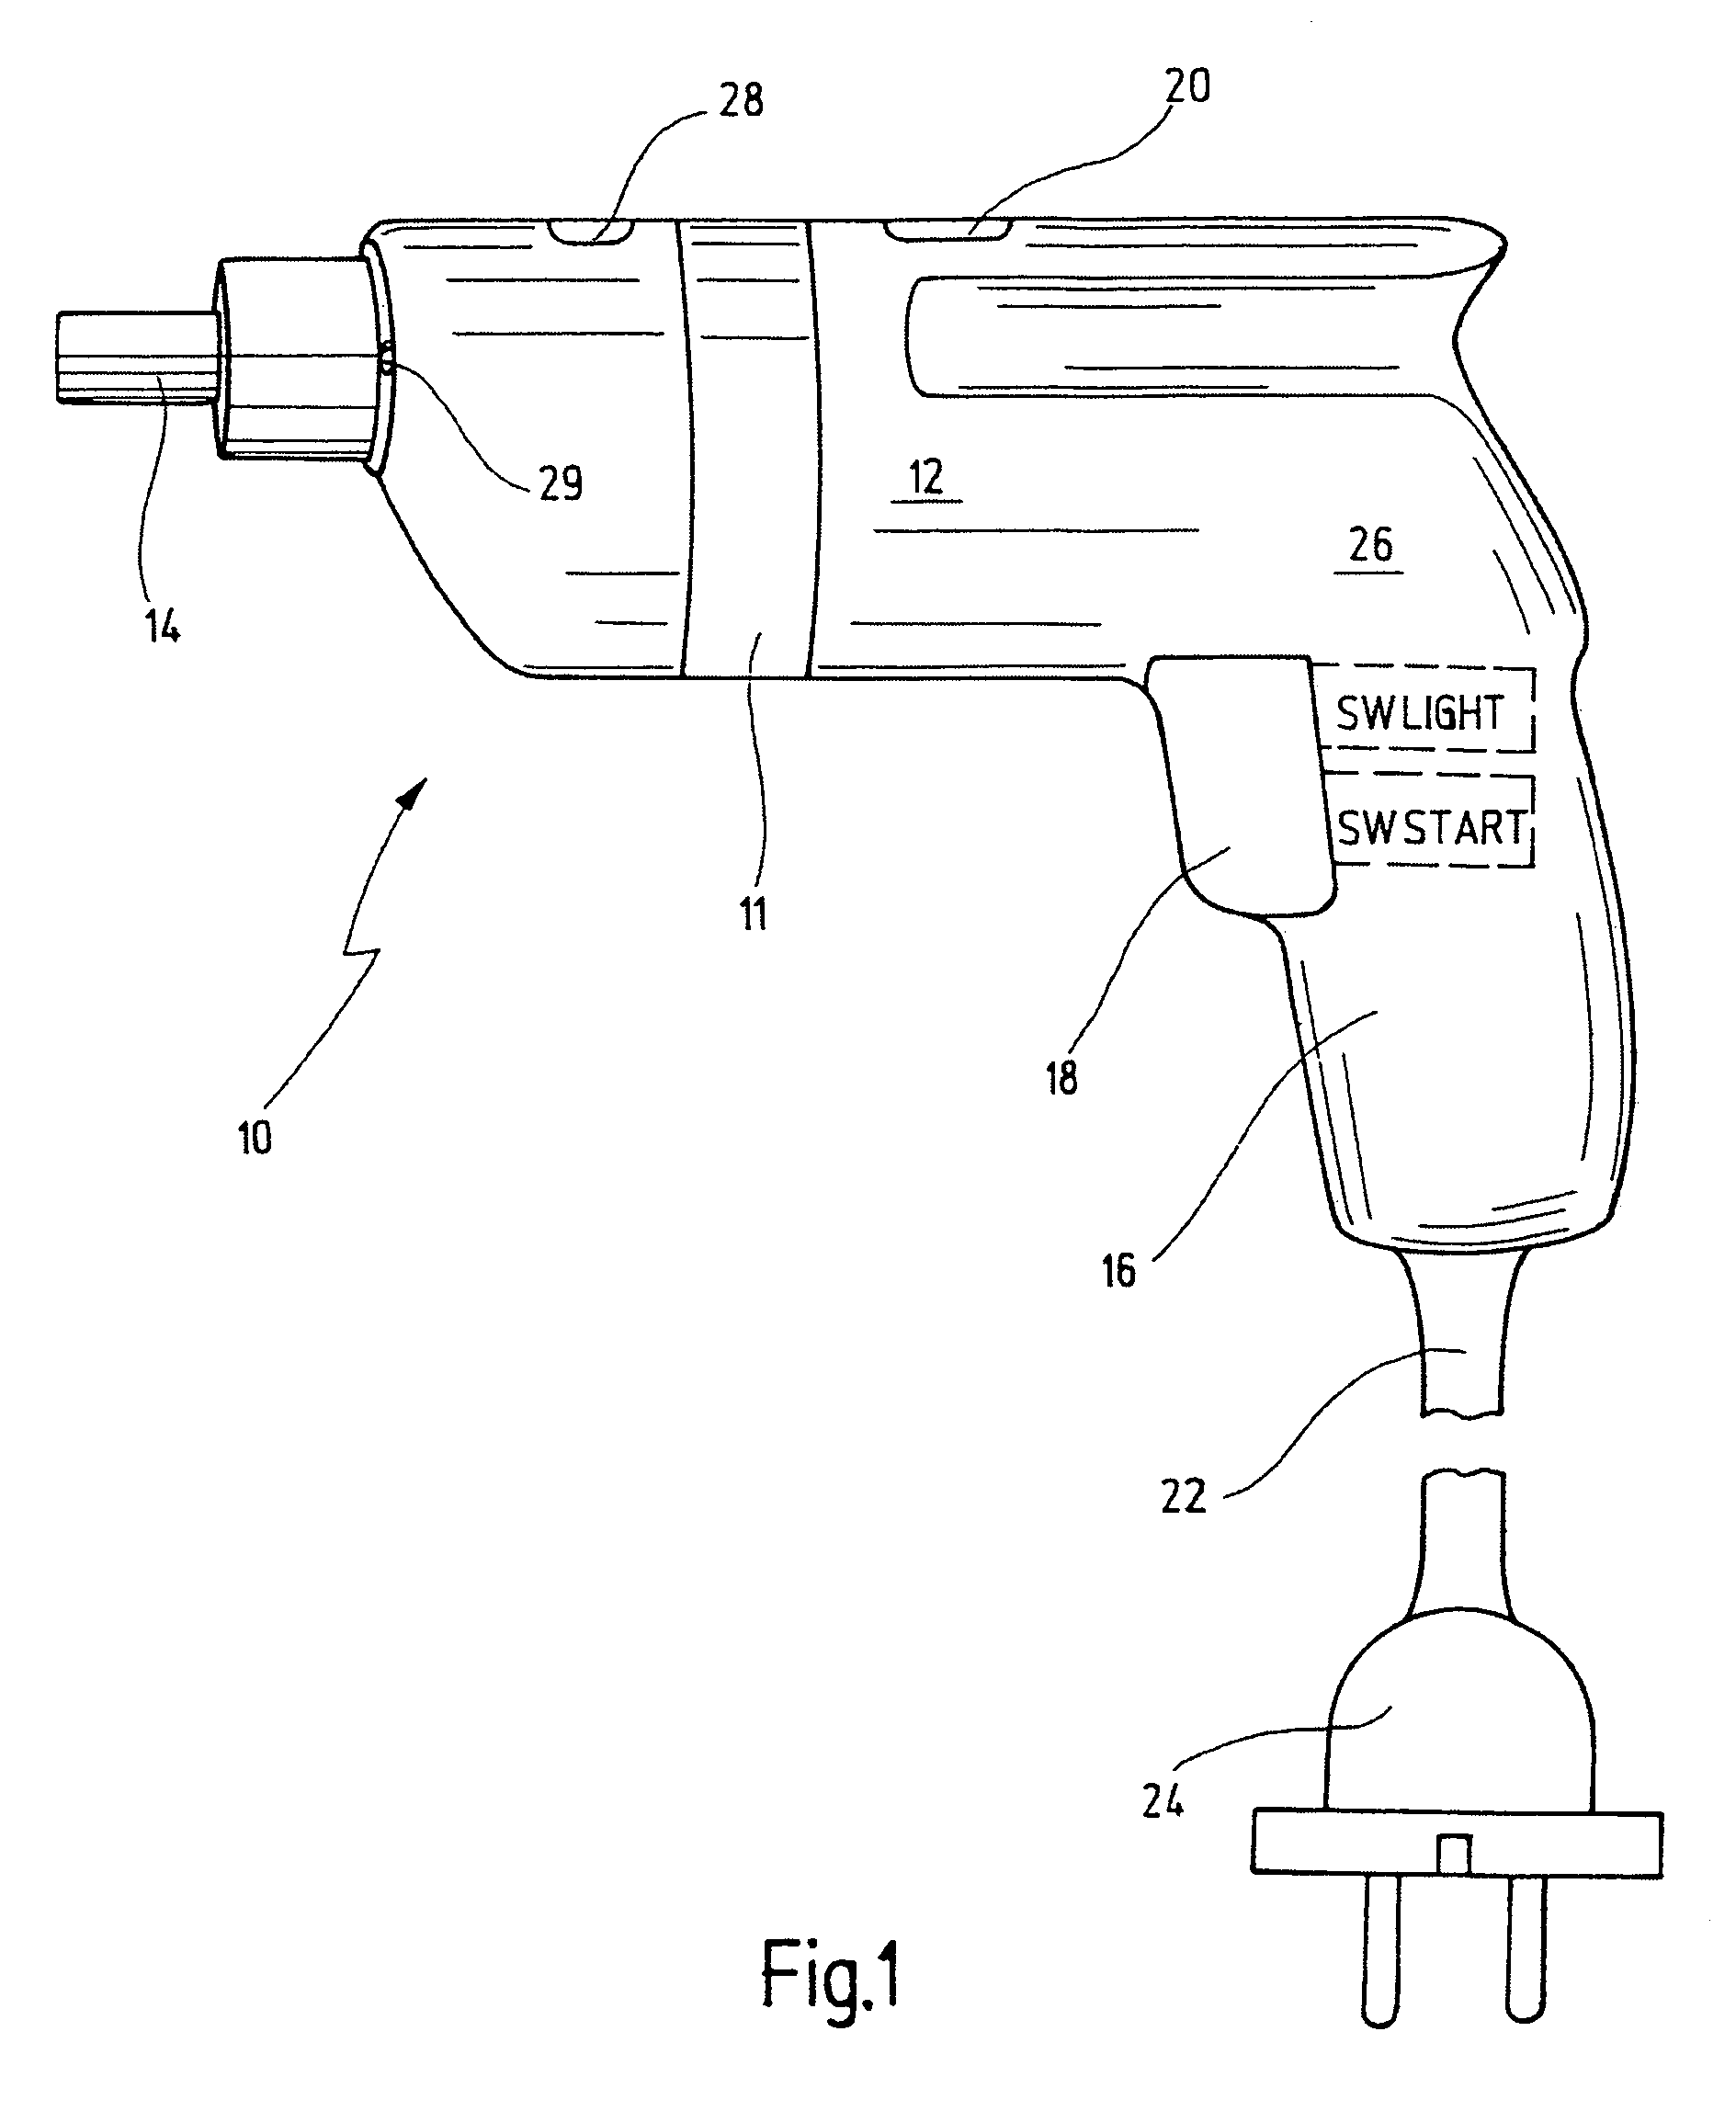 Method of Controlling the direction of rotation of a power tool